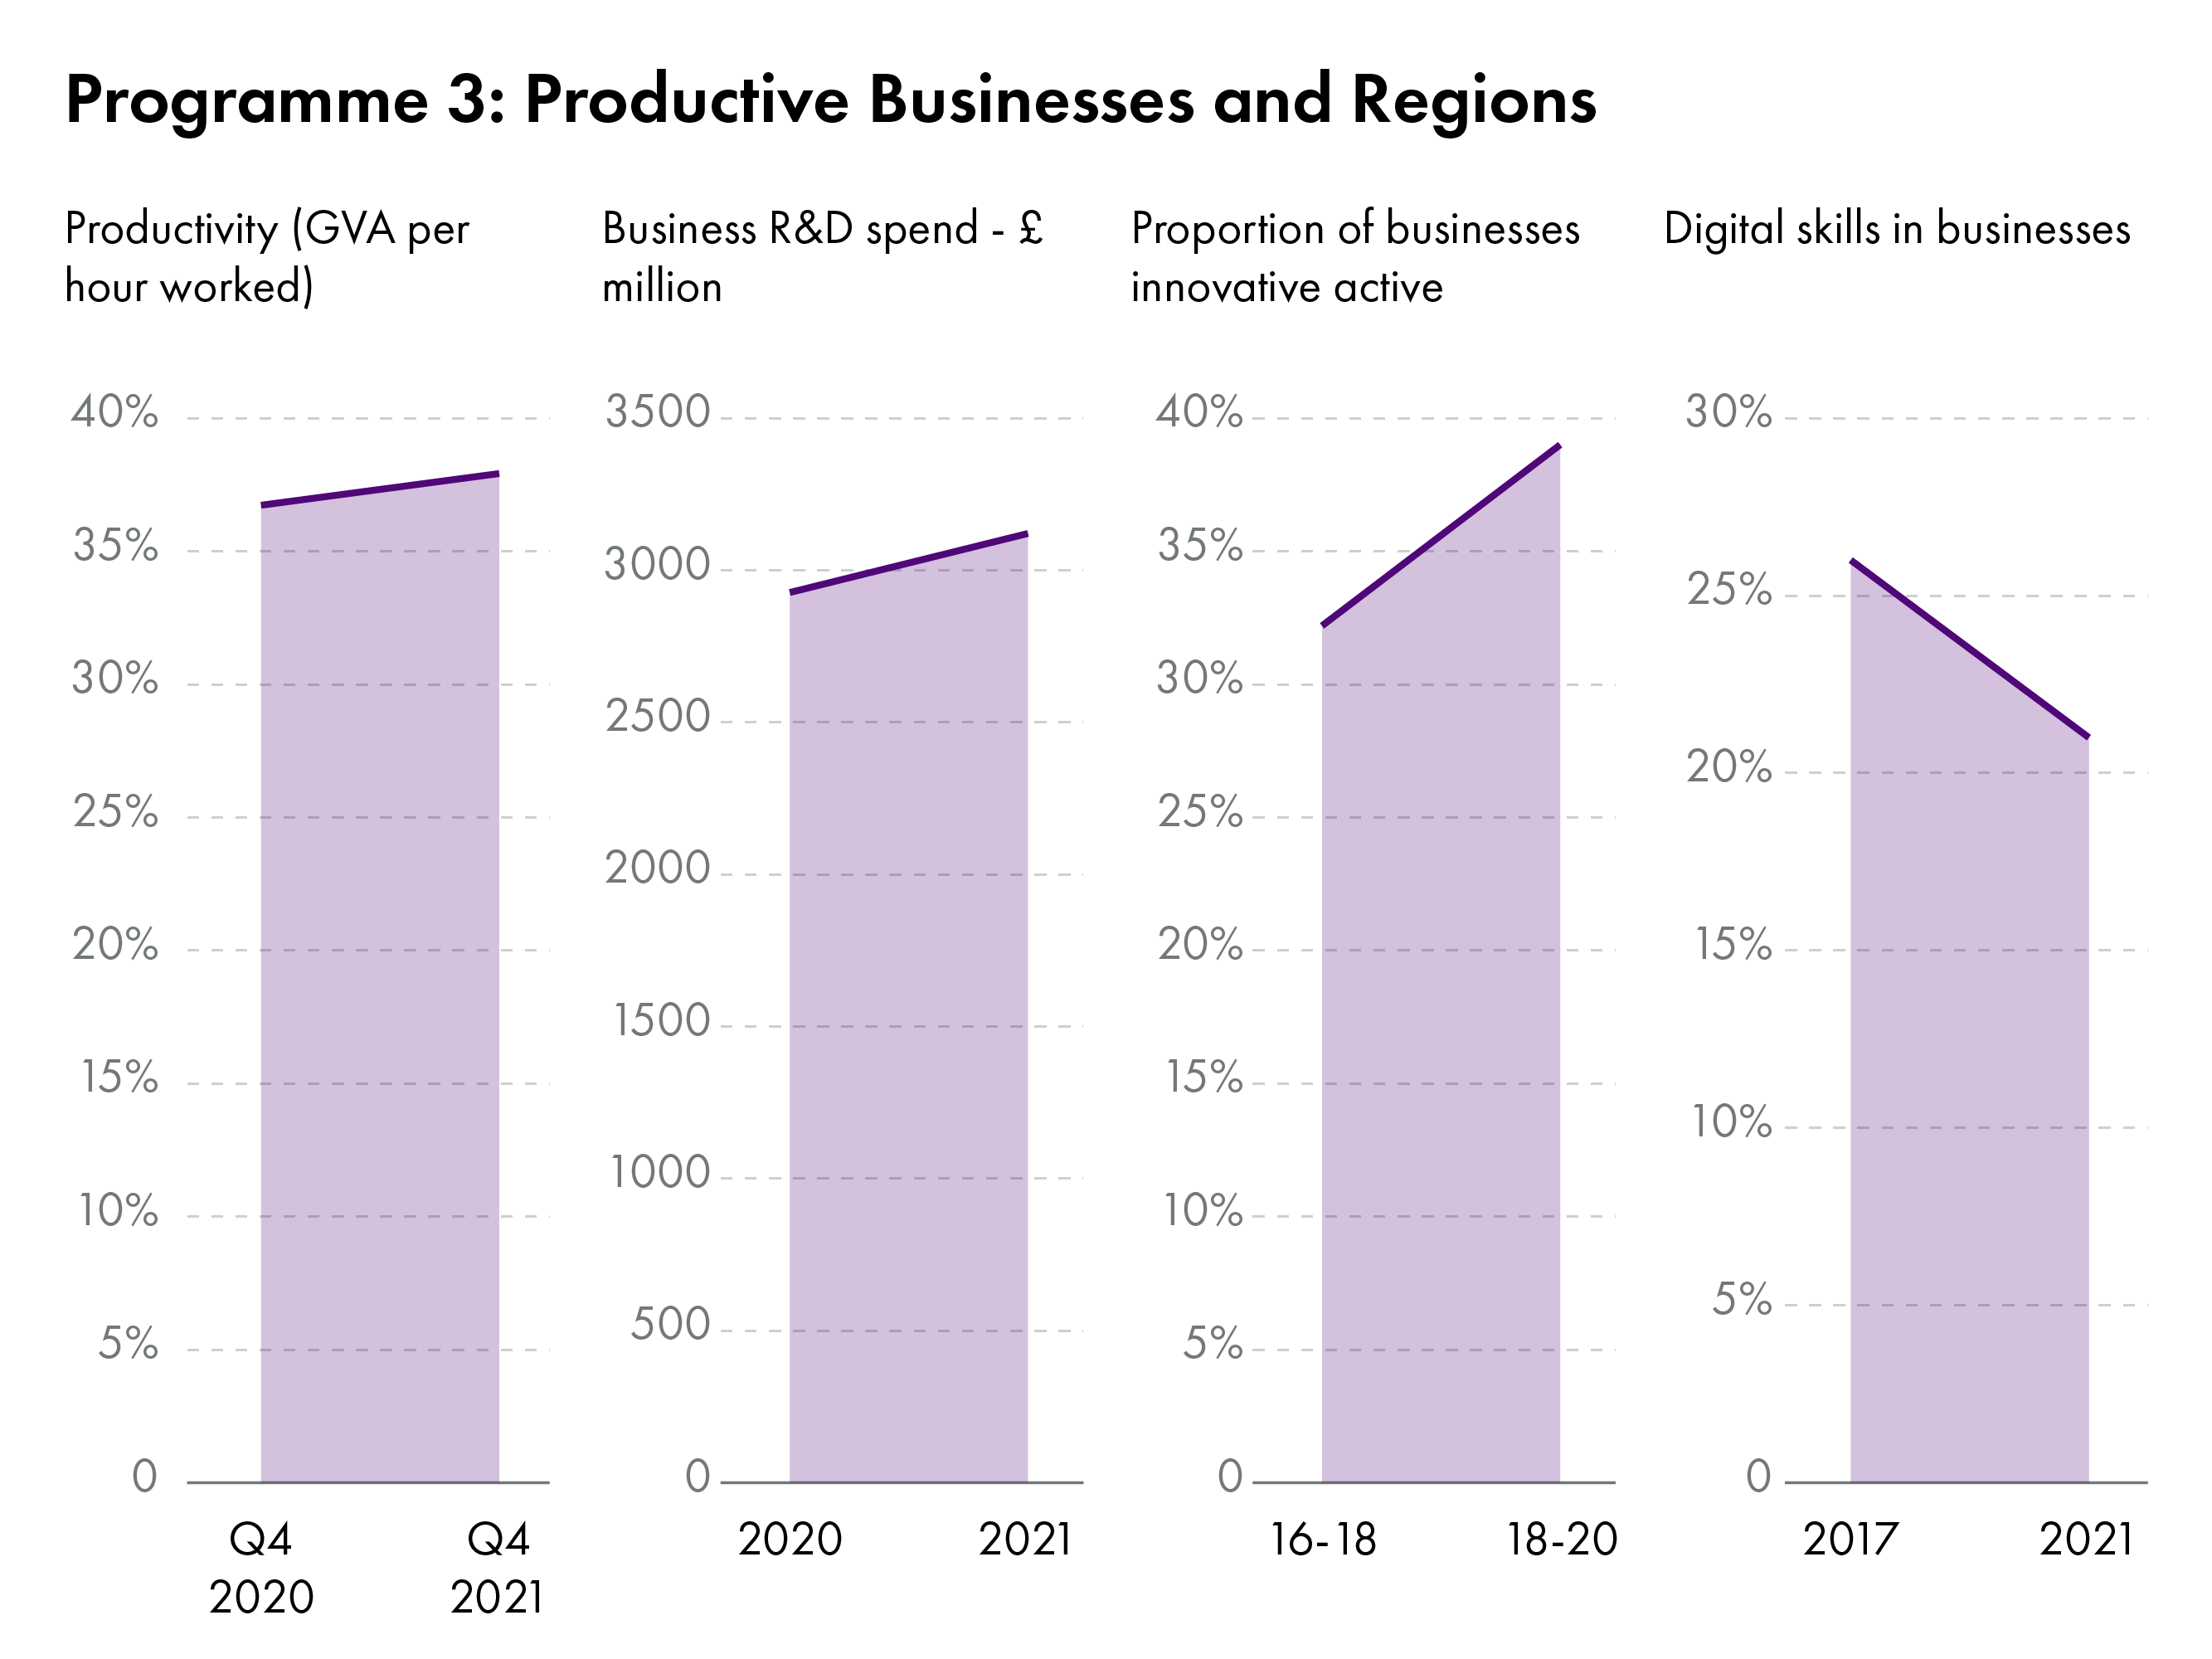 The key indicators for the ‘Productive Businesses and Regions’ programme are productivity, business R&D spend, proportion of businesses ‘innovative active’, and digital skills in business. All the data for these indicators represents the baseline.